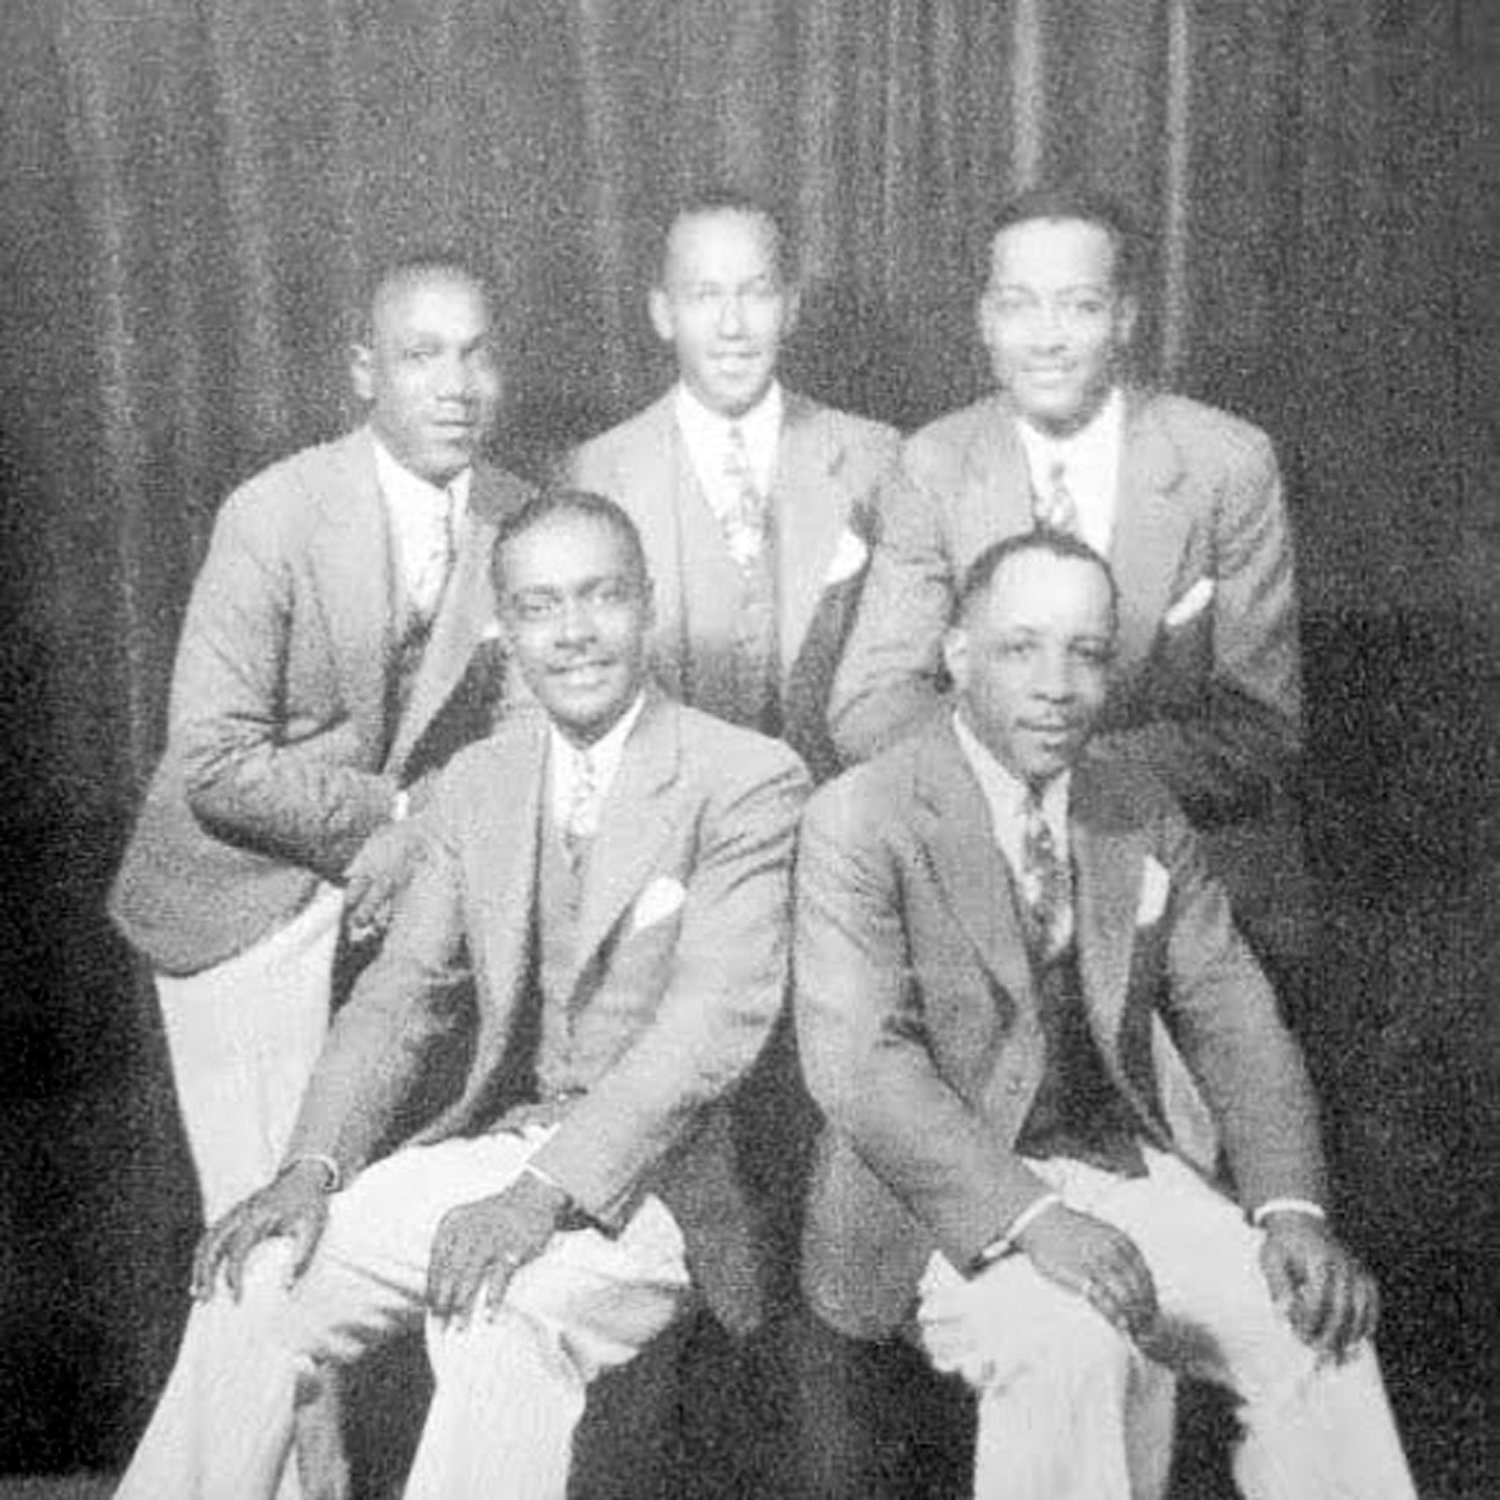 Sid Stratton and the Four Horsemen performed in Bucks and surrounding counties in the 1940s and 1950s.